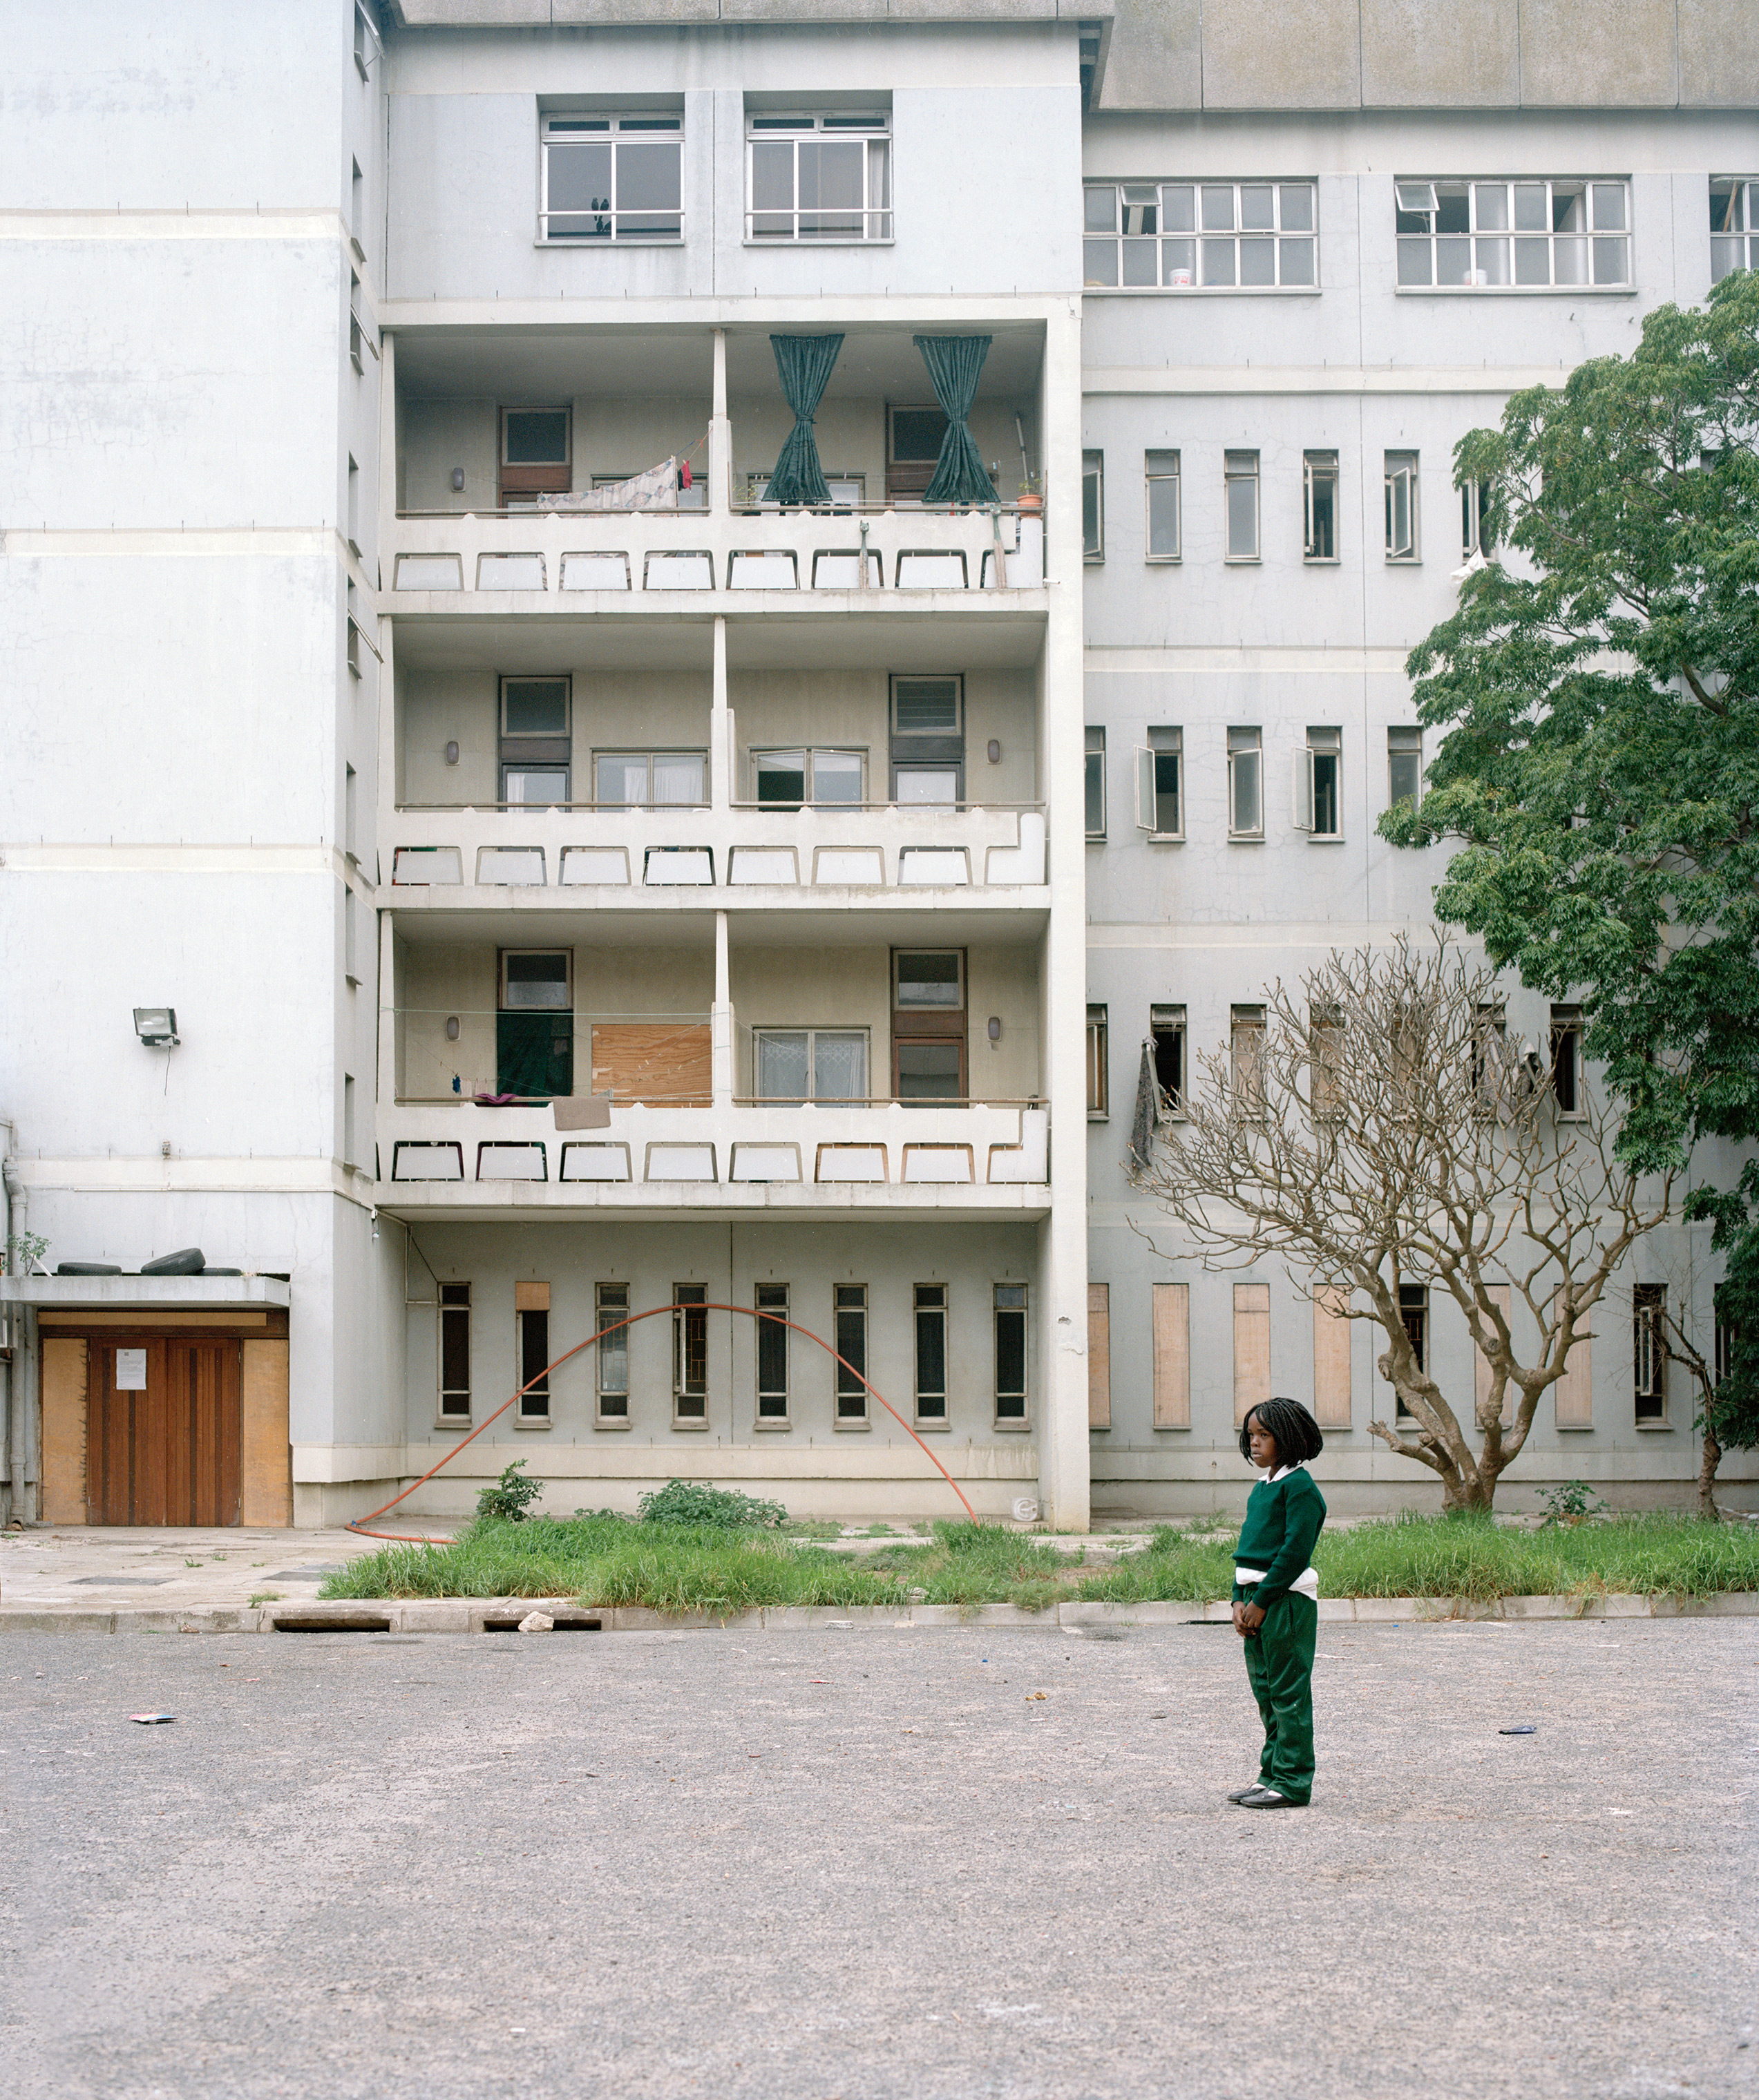 Outside an abandoned nurses’ residence in Cape Town, which is currently occupied by homeless or evicted families. (Sarah Nankin for TIME)